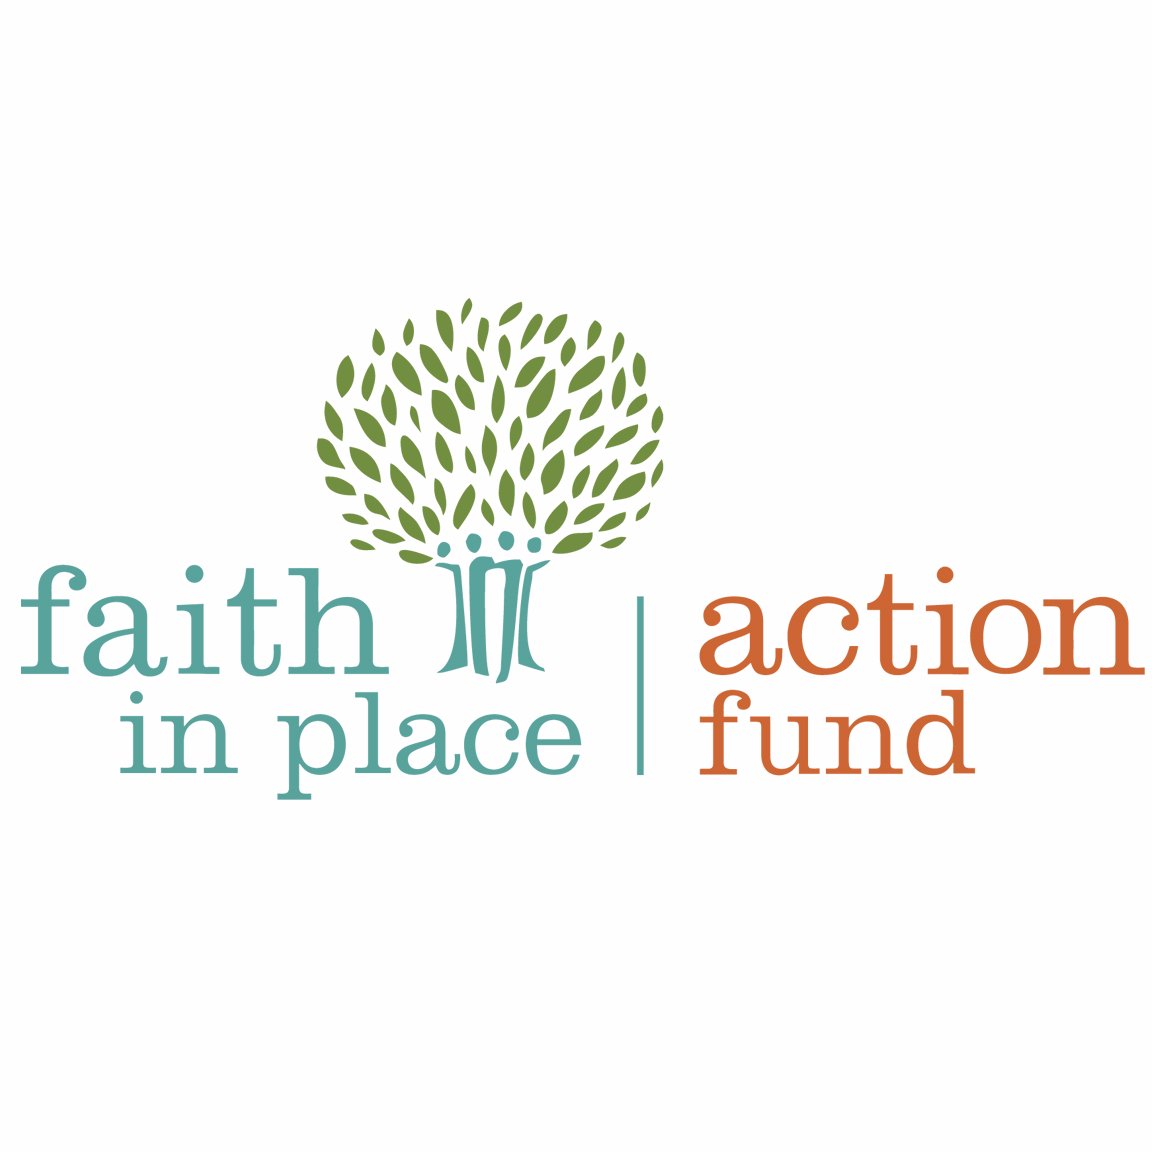 The Faith in Place Action Fund develops and advocates for legislation, regulations, and government programs in IL, IN, and WI to care for the Earth.